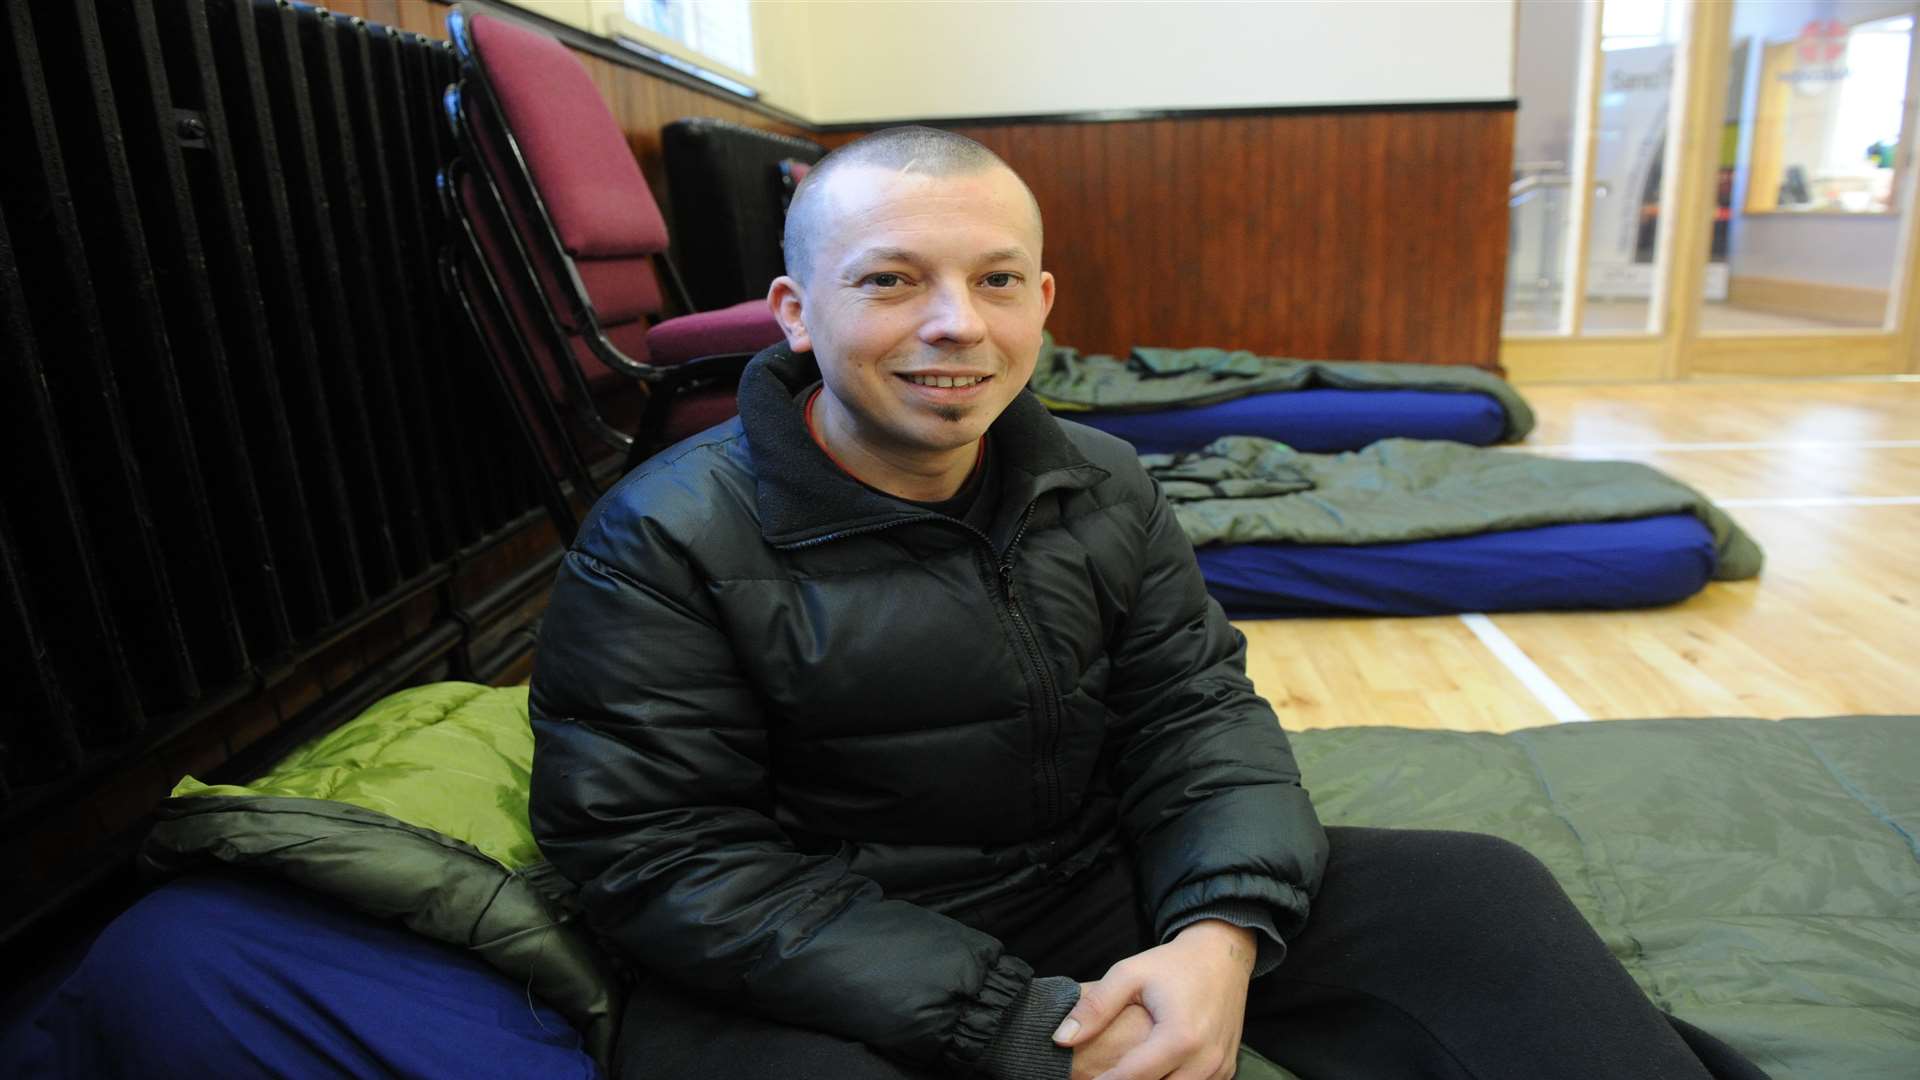 Glen Selves is a beneficiary of the homeless night shelter